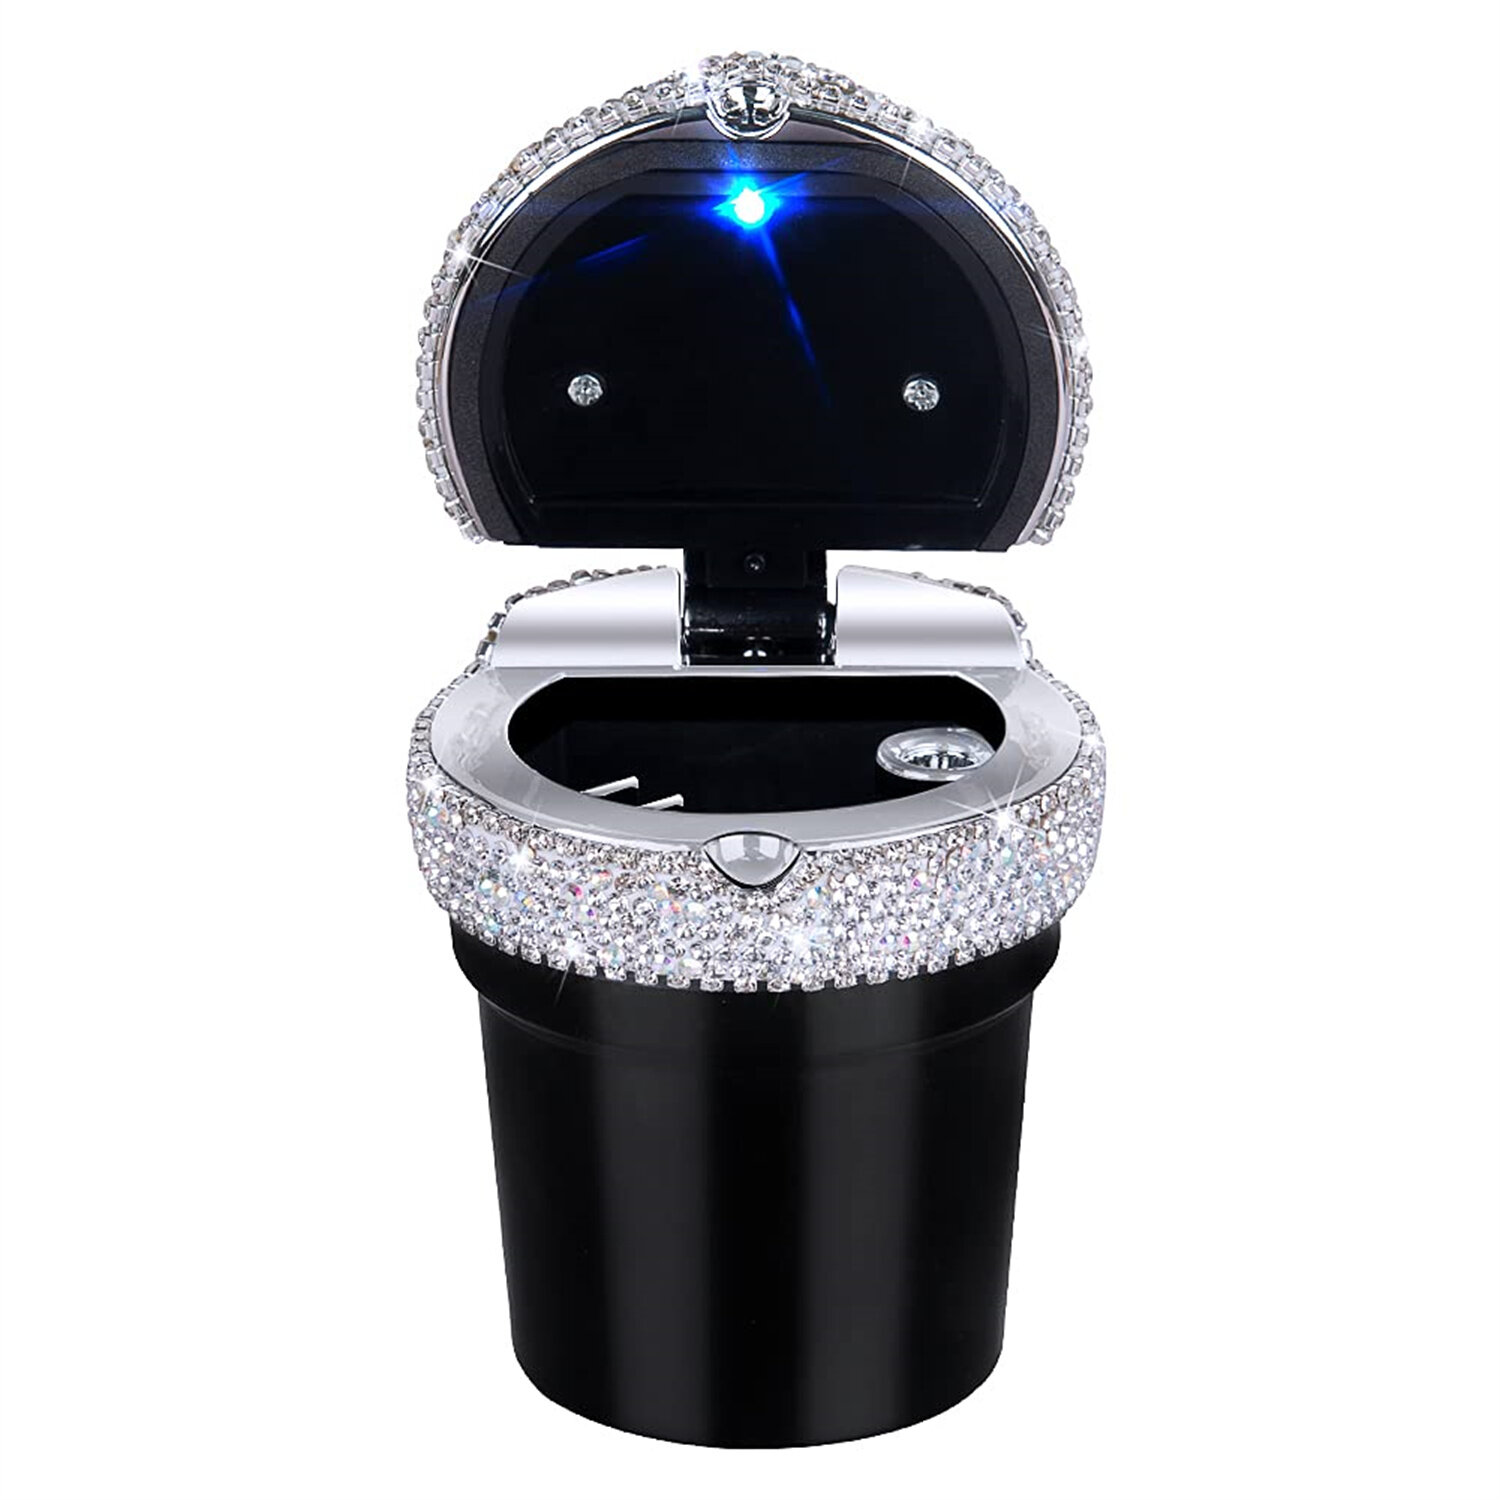 Duftende fire gange Vidner SSHAOSS Car Ashtray Portable Bling Cigarette Smokeless Cylinder Cup Holder  With Blue LED Light Indicator,Car Accessories For Women,Ideal For Car,Home  And Office | Wayfair